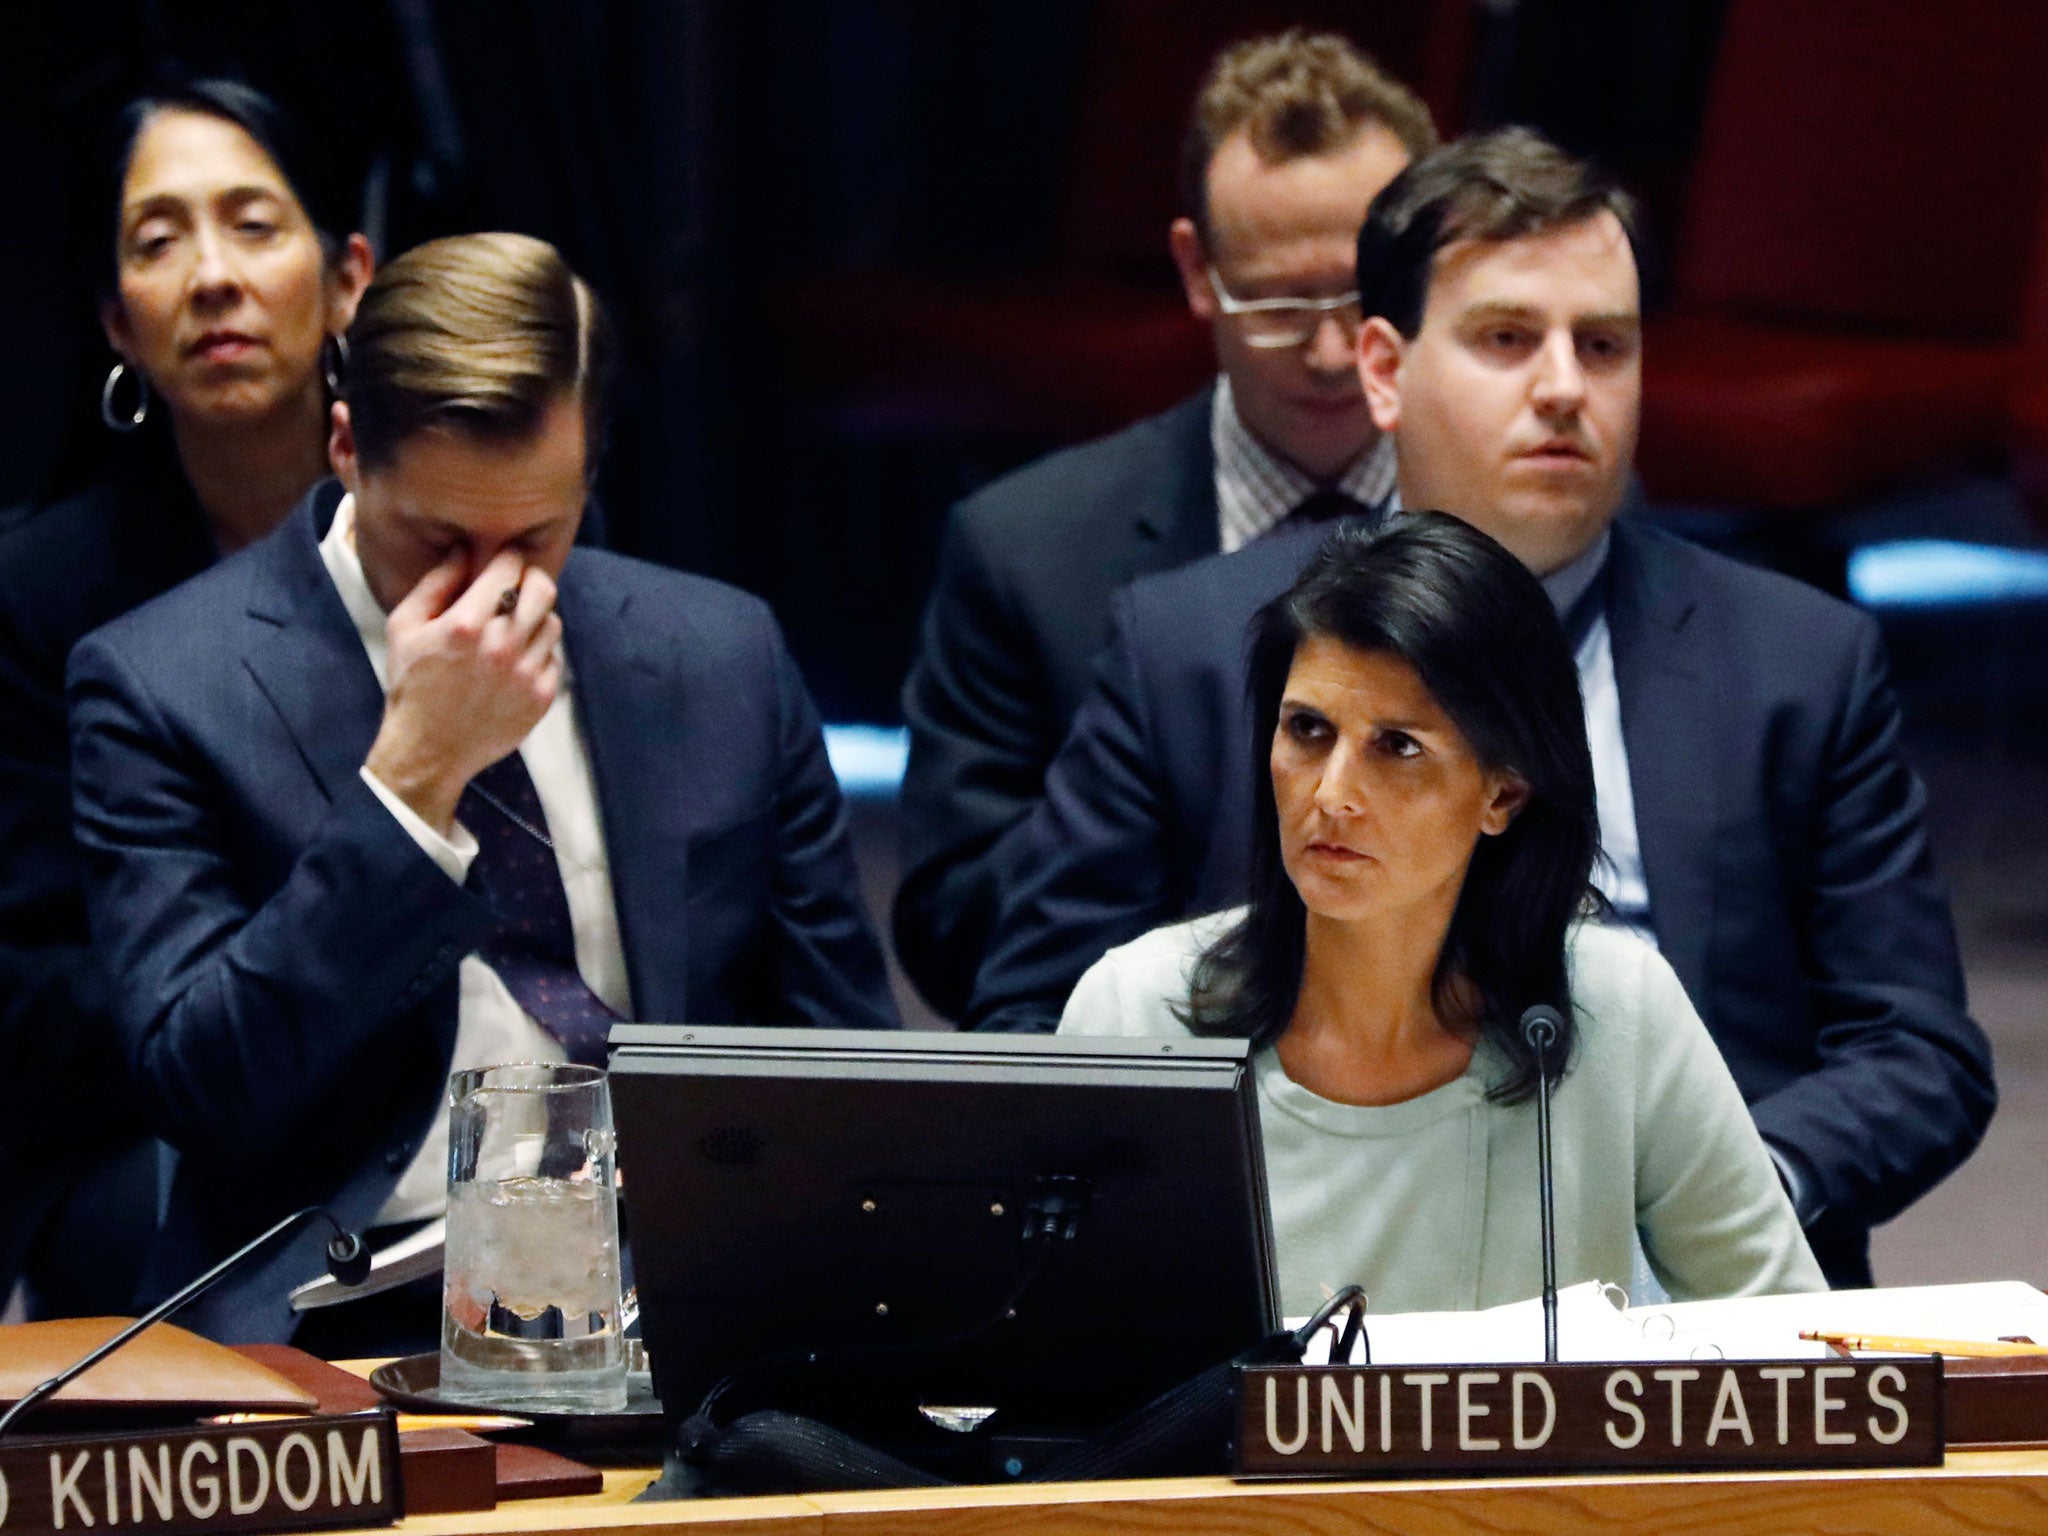 US to boycott UN meeting to discuss Israeli and Palestinian conflict, citing anti-Israel bias